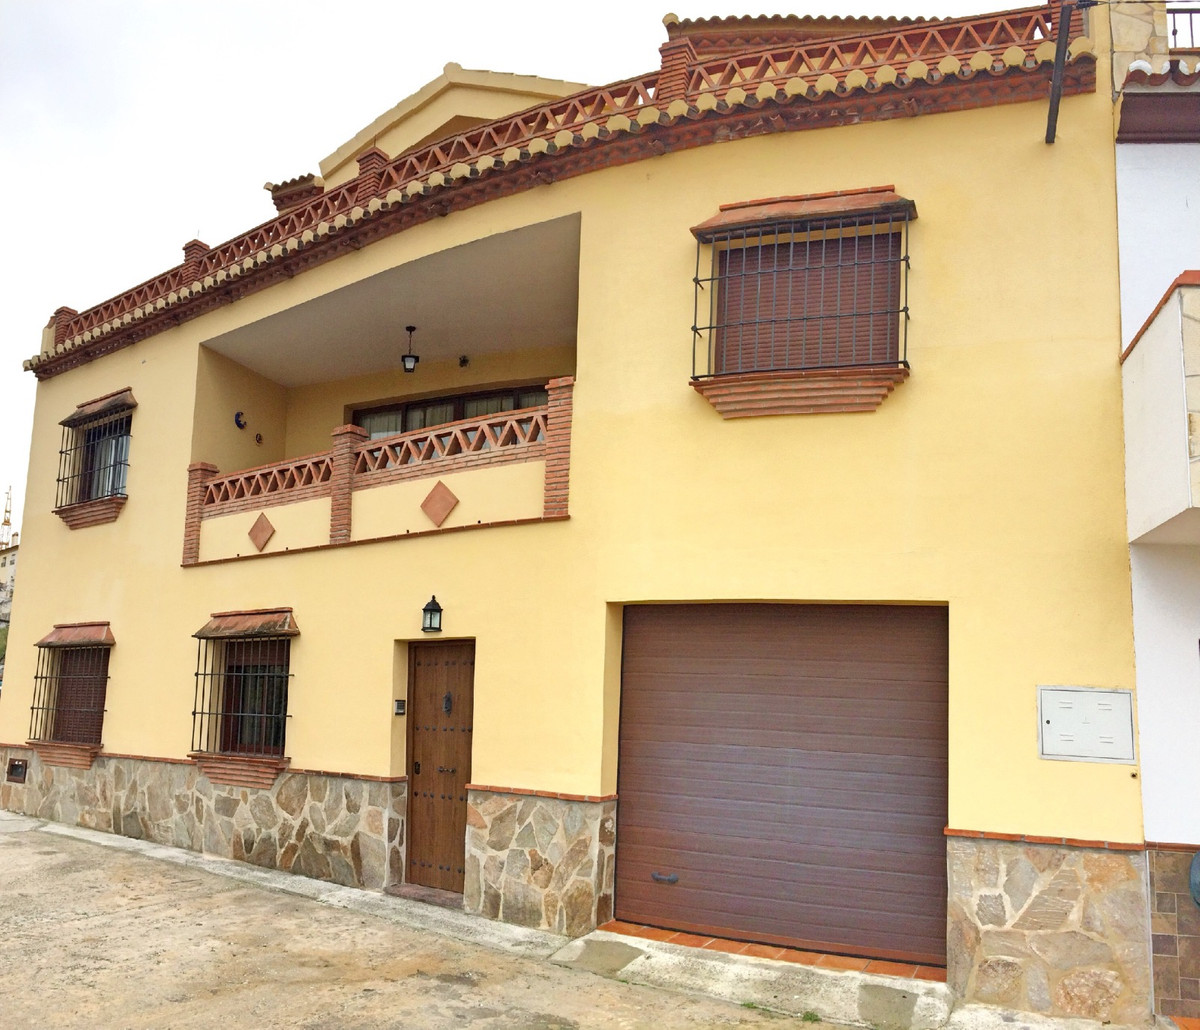 Large 5 bedroom house just outside Alora.

On the outskirts of Barriada El Puente (Alora) stands thi, Spain